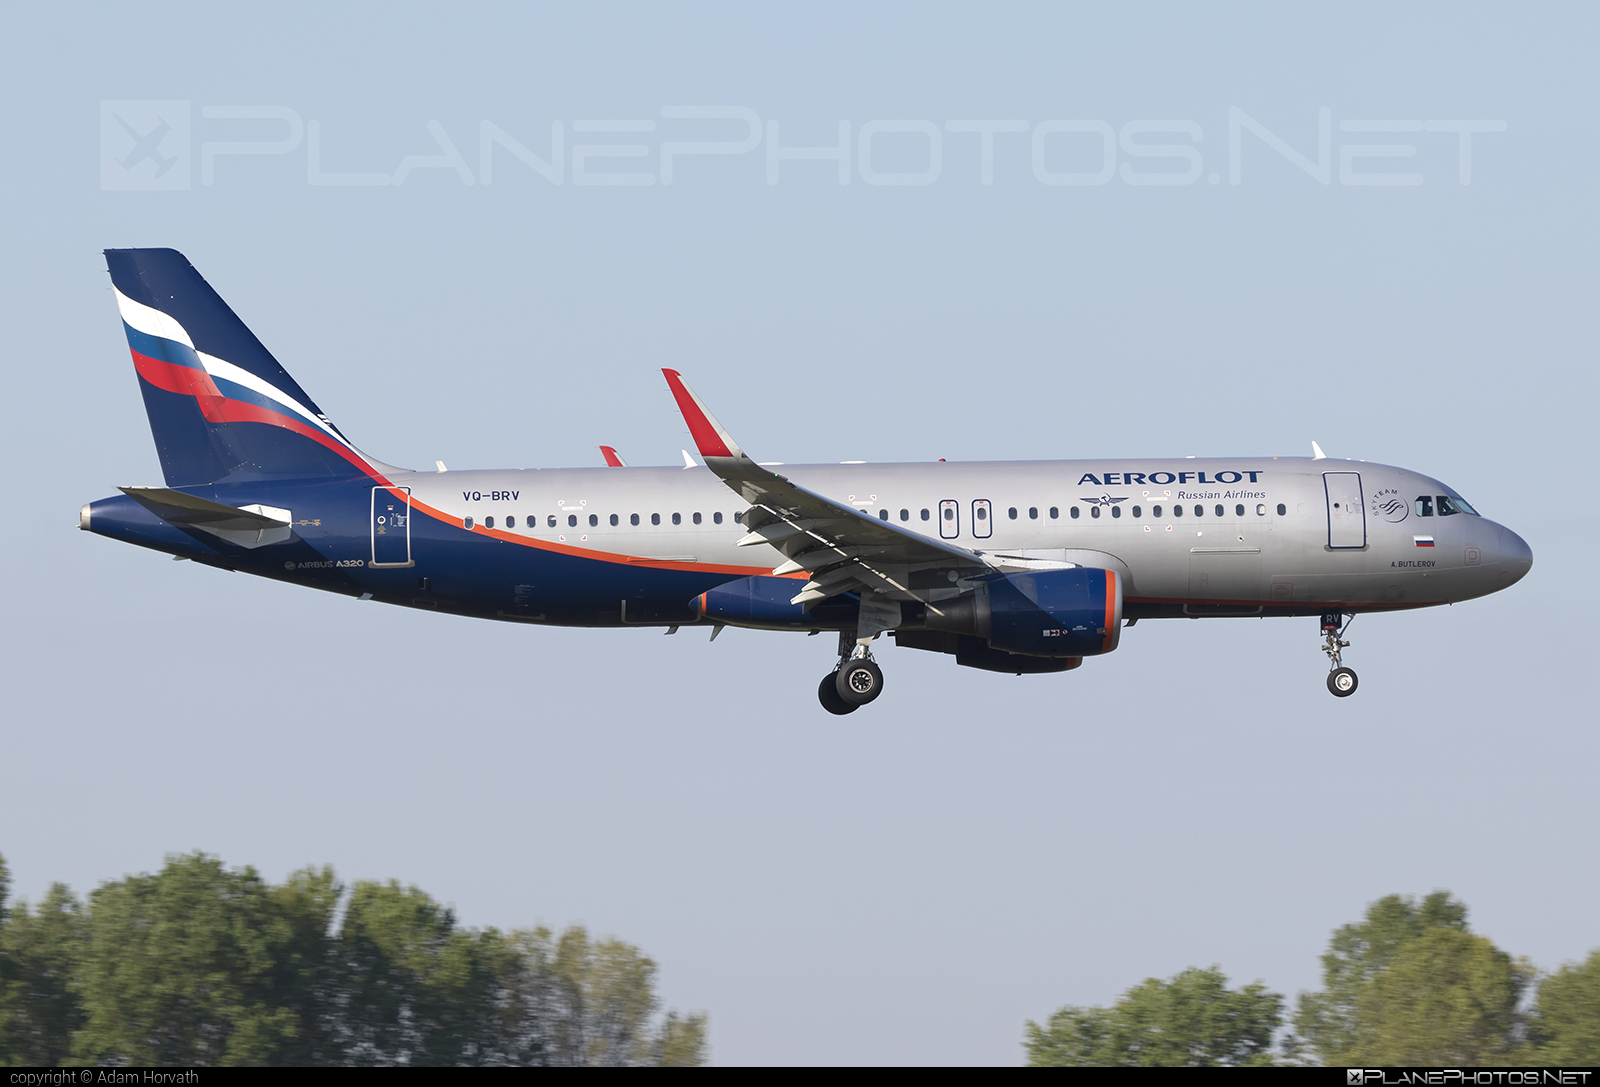 Airbus A320-214 - VQ-BRV operated by Aeroflot #a320 #a320family #aeroflot #airbus #airbus320